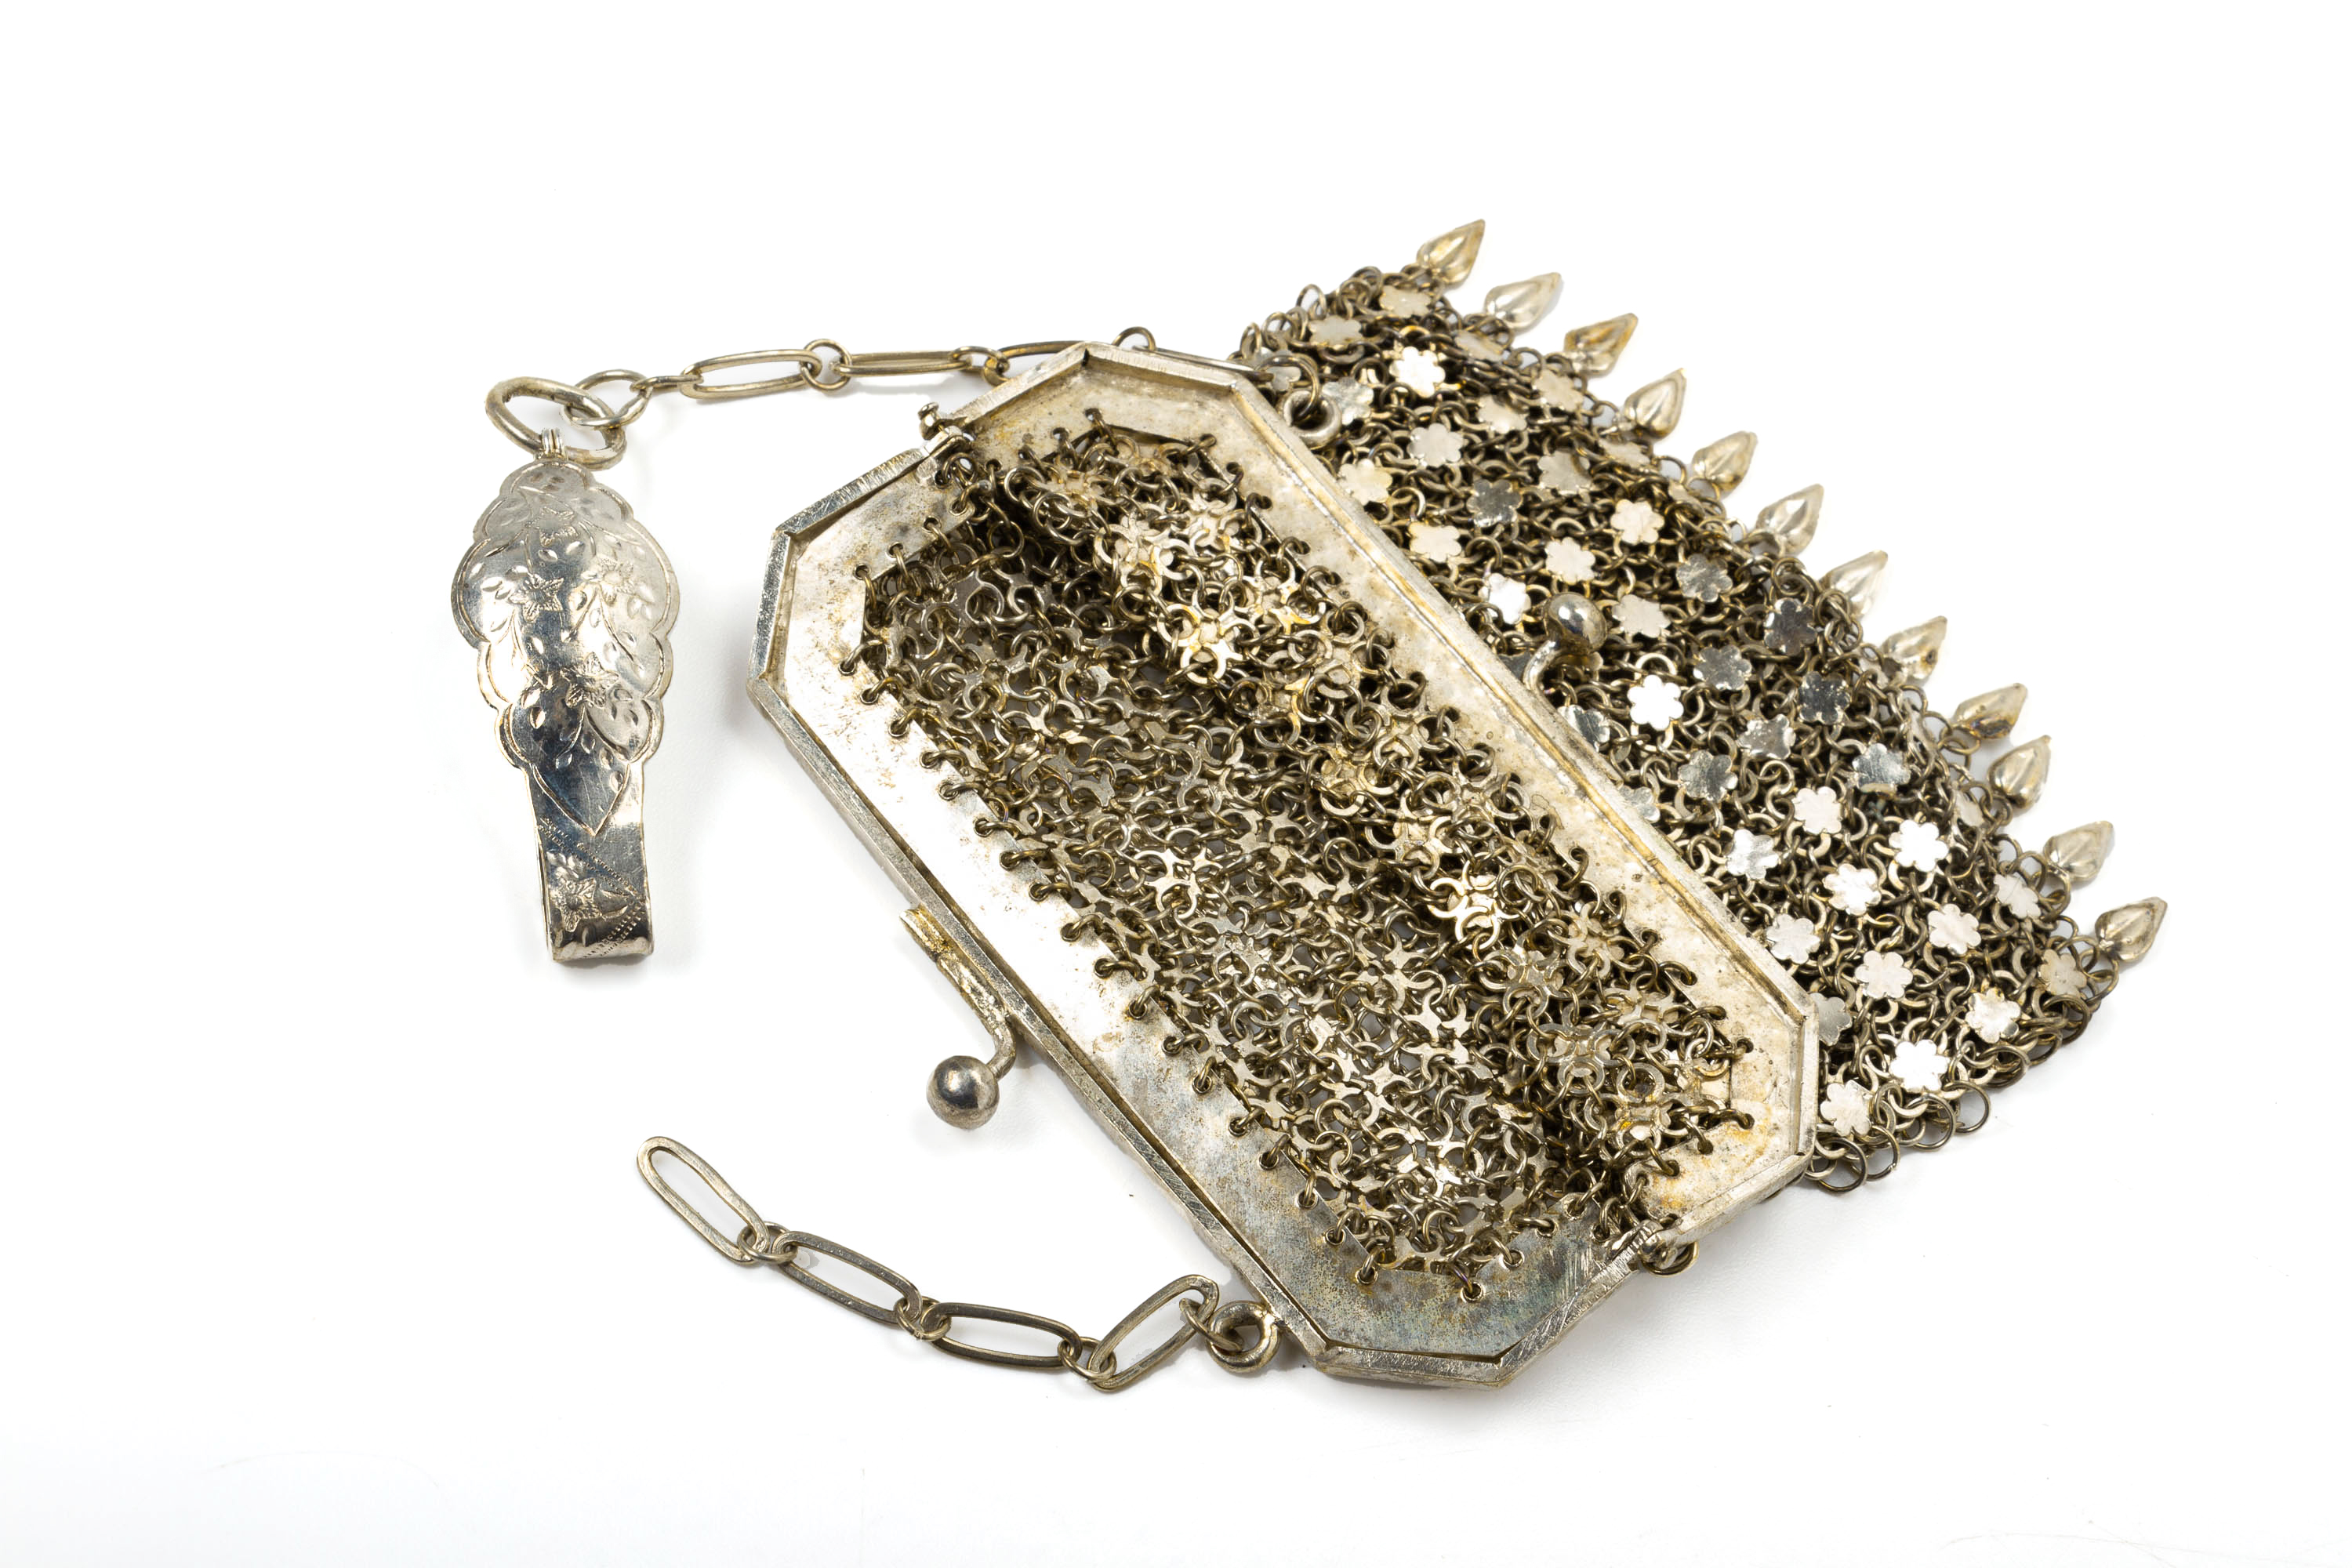 TWO WHITE METAL MESH PURSES WITH CHATELAINE CLIPS - Image 4 of 15